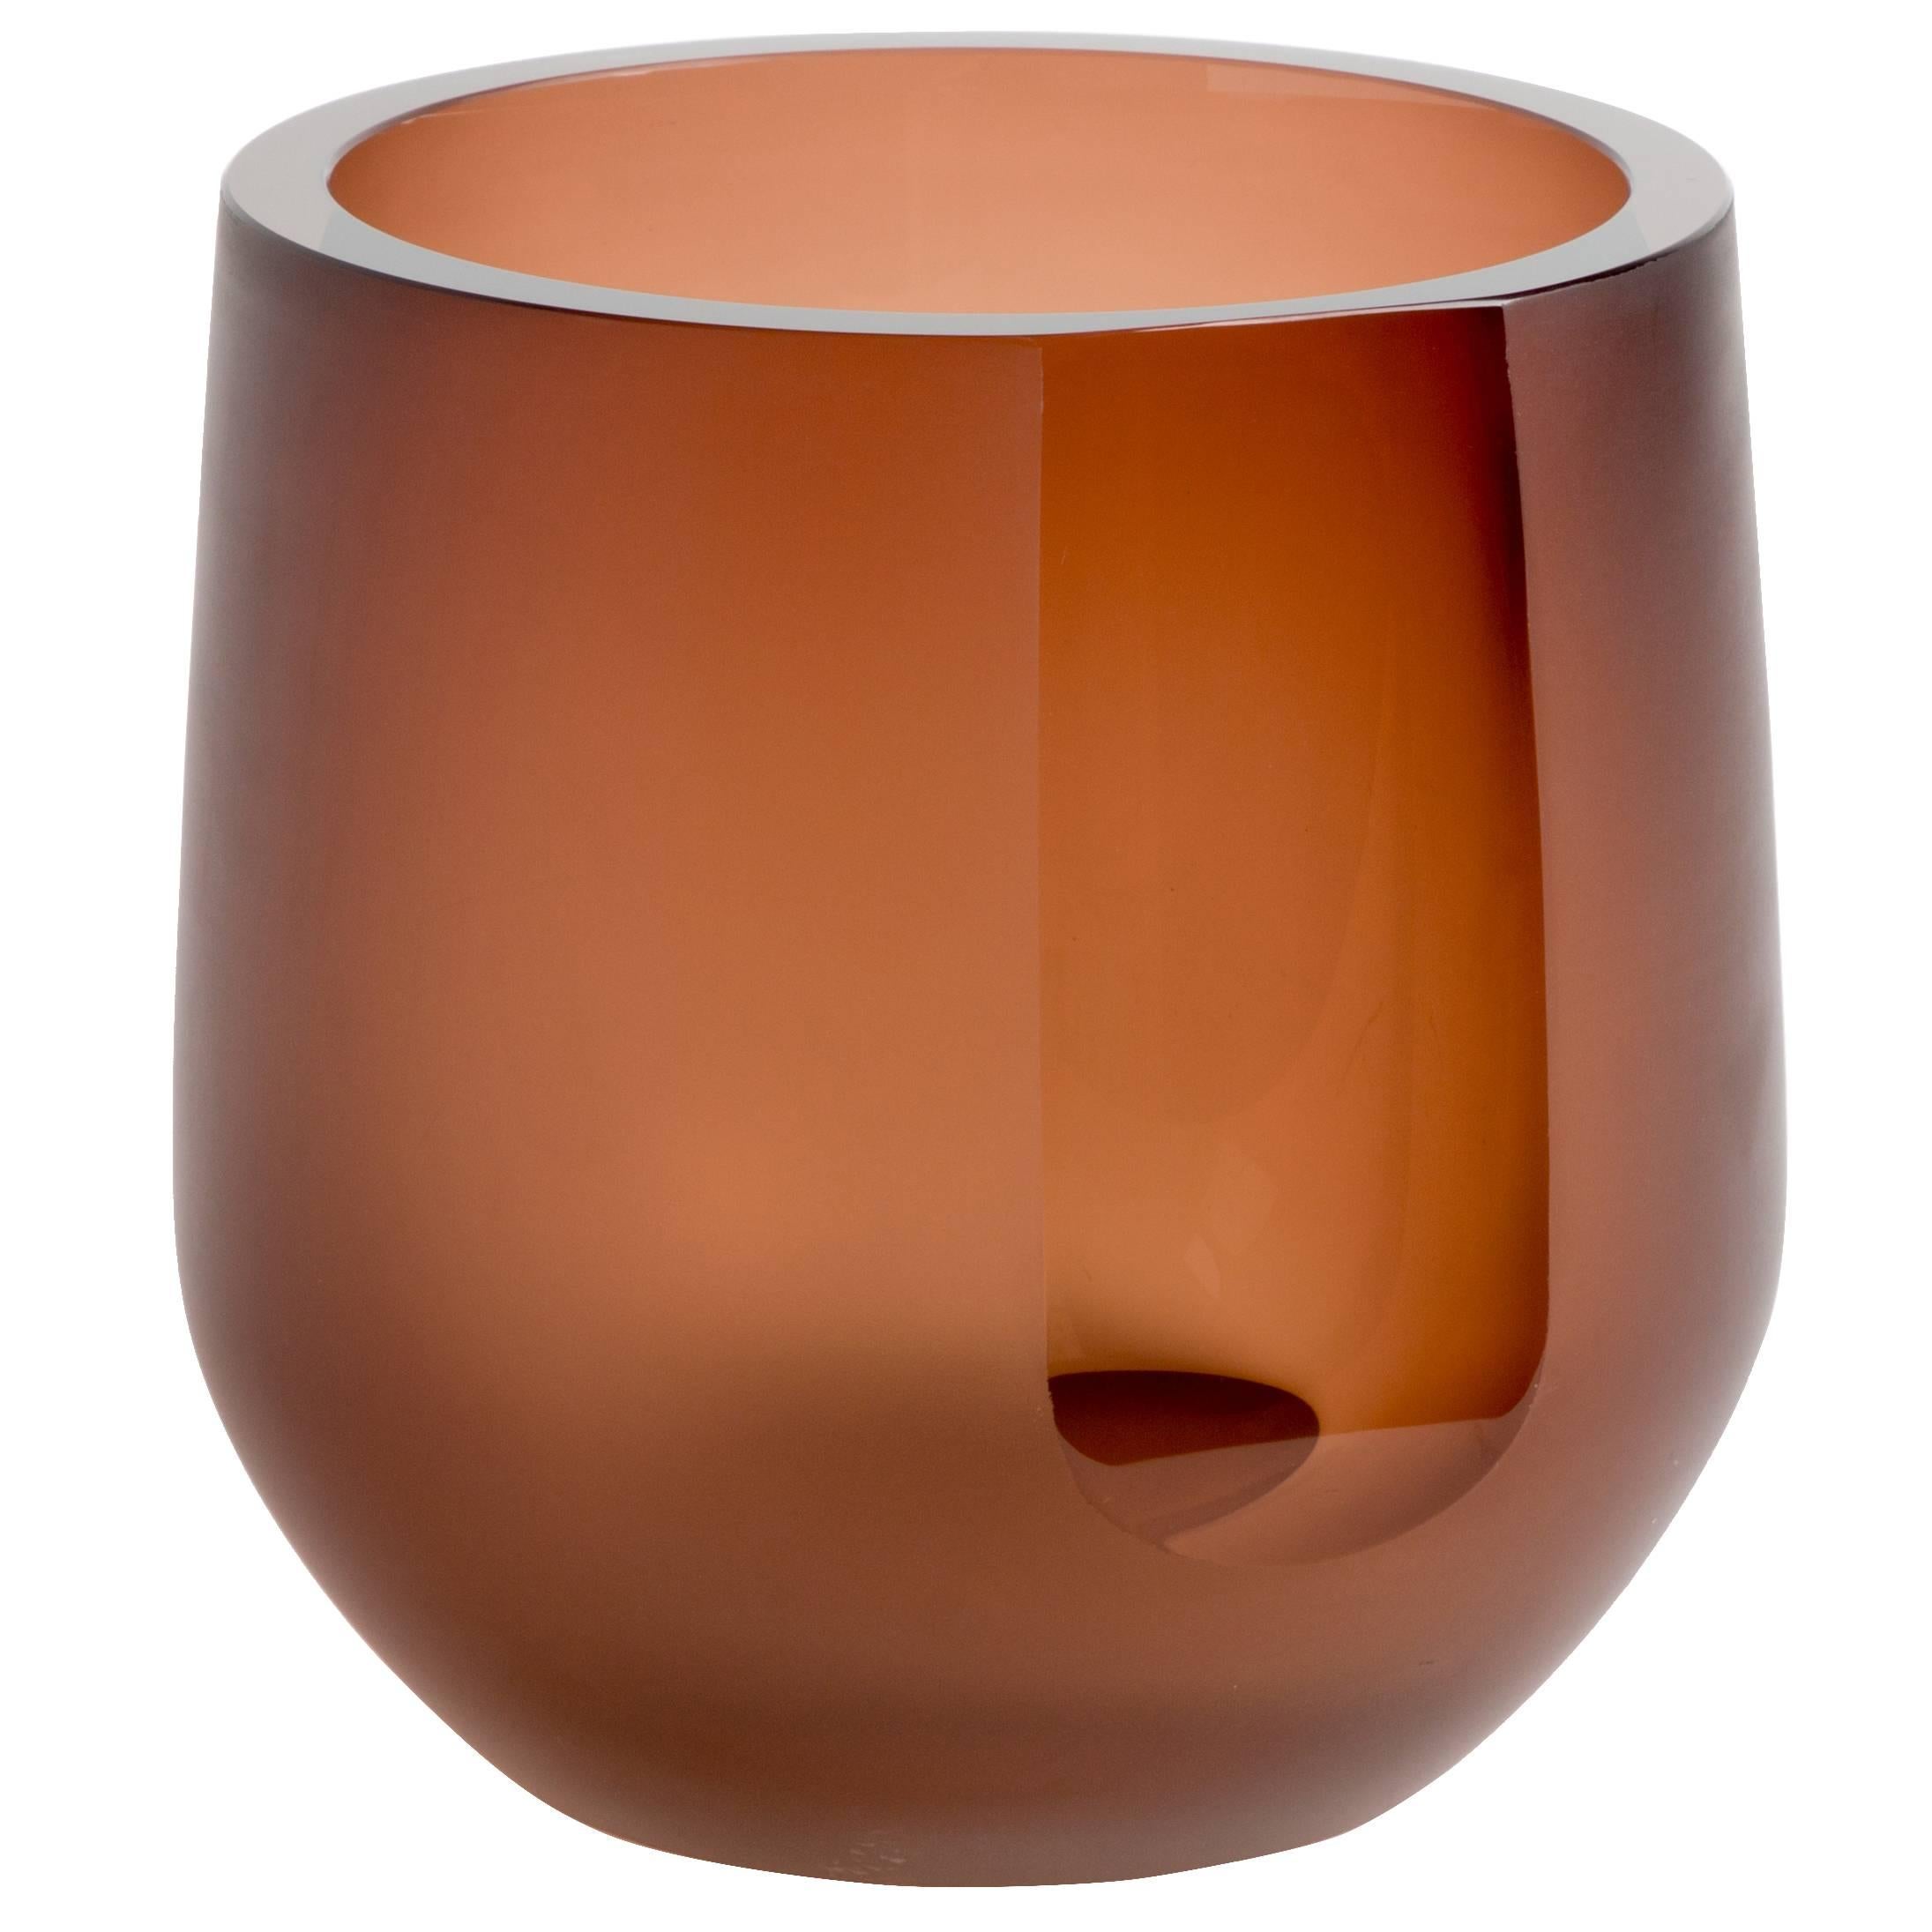 The Porto Ice Bucket is a simple exercise in optics and color. The 'Tea' color and reflective light are diffused by a surface etching. A single panel, or 